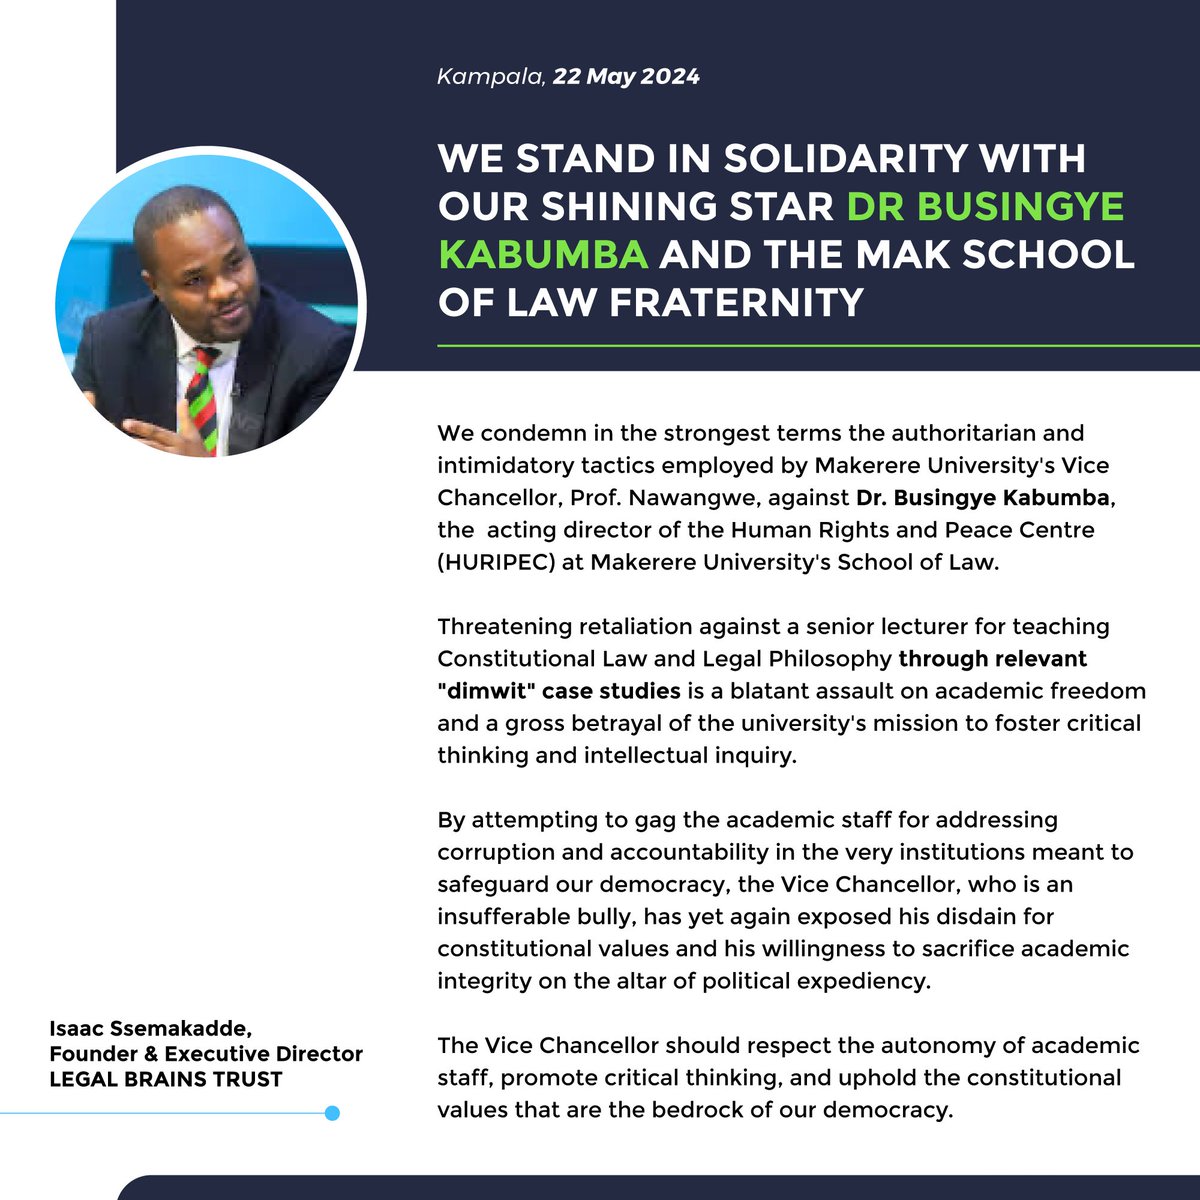 IN SOLIDARITY WITH @bkabumba @MakerereLaw